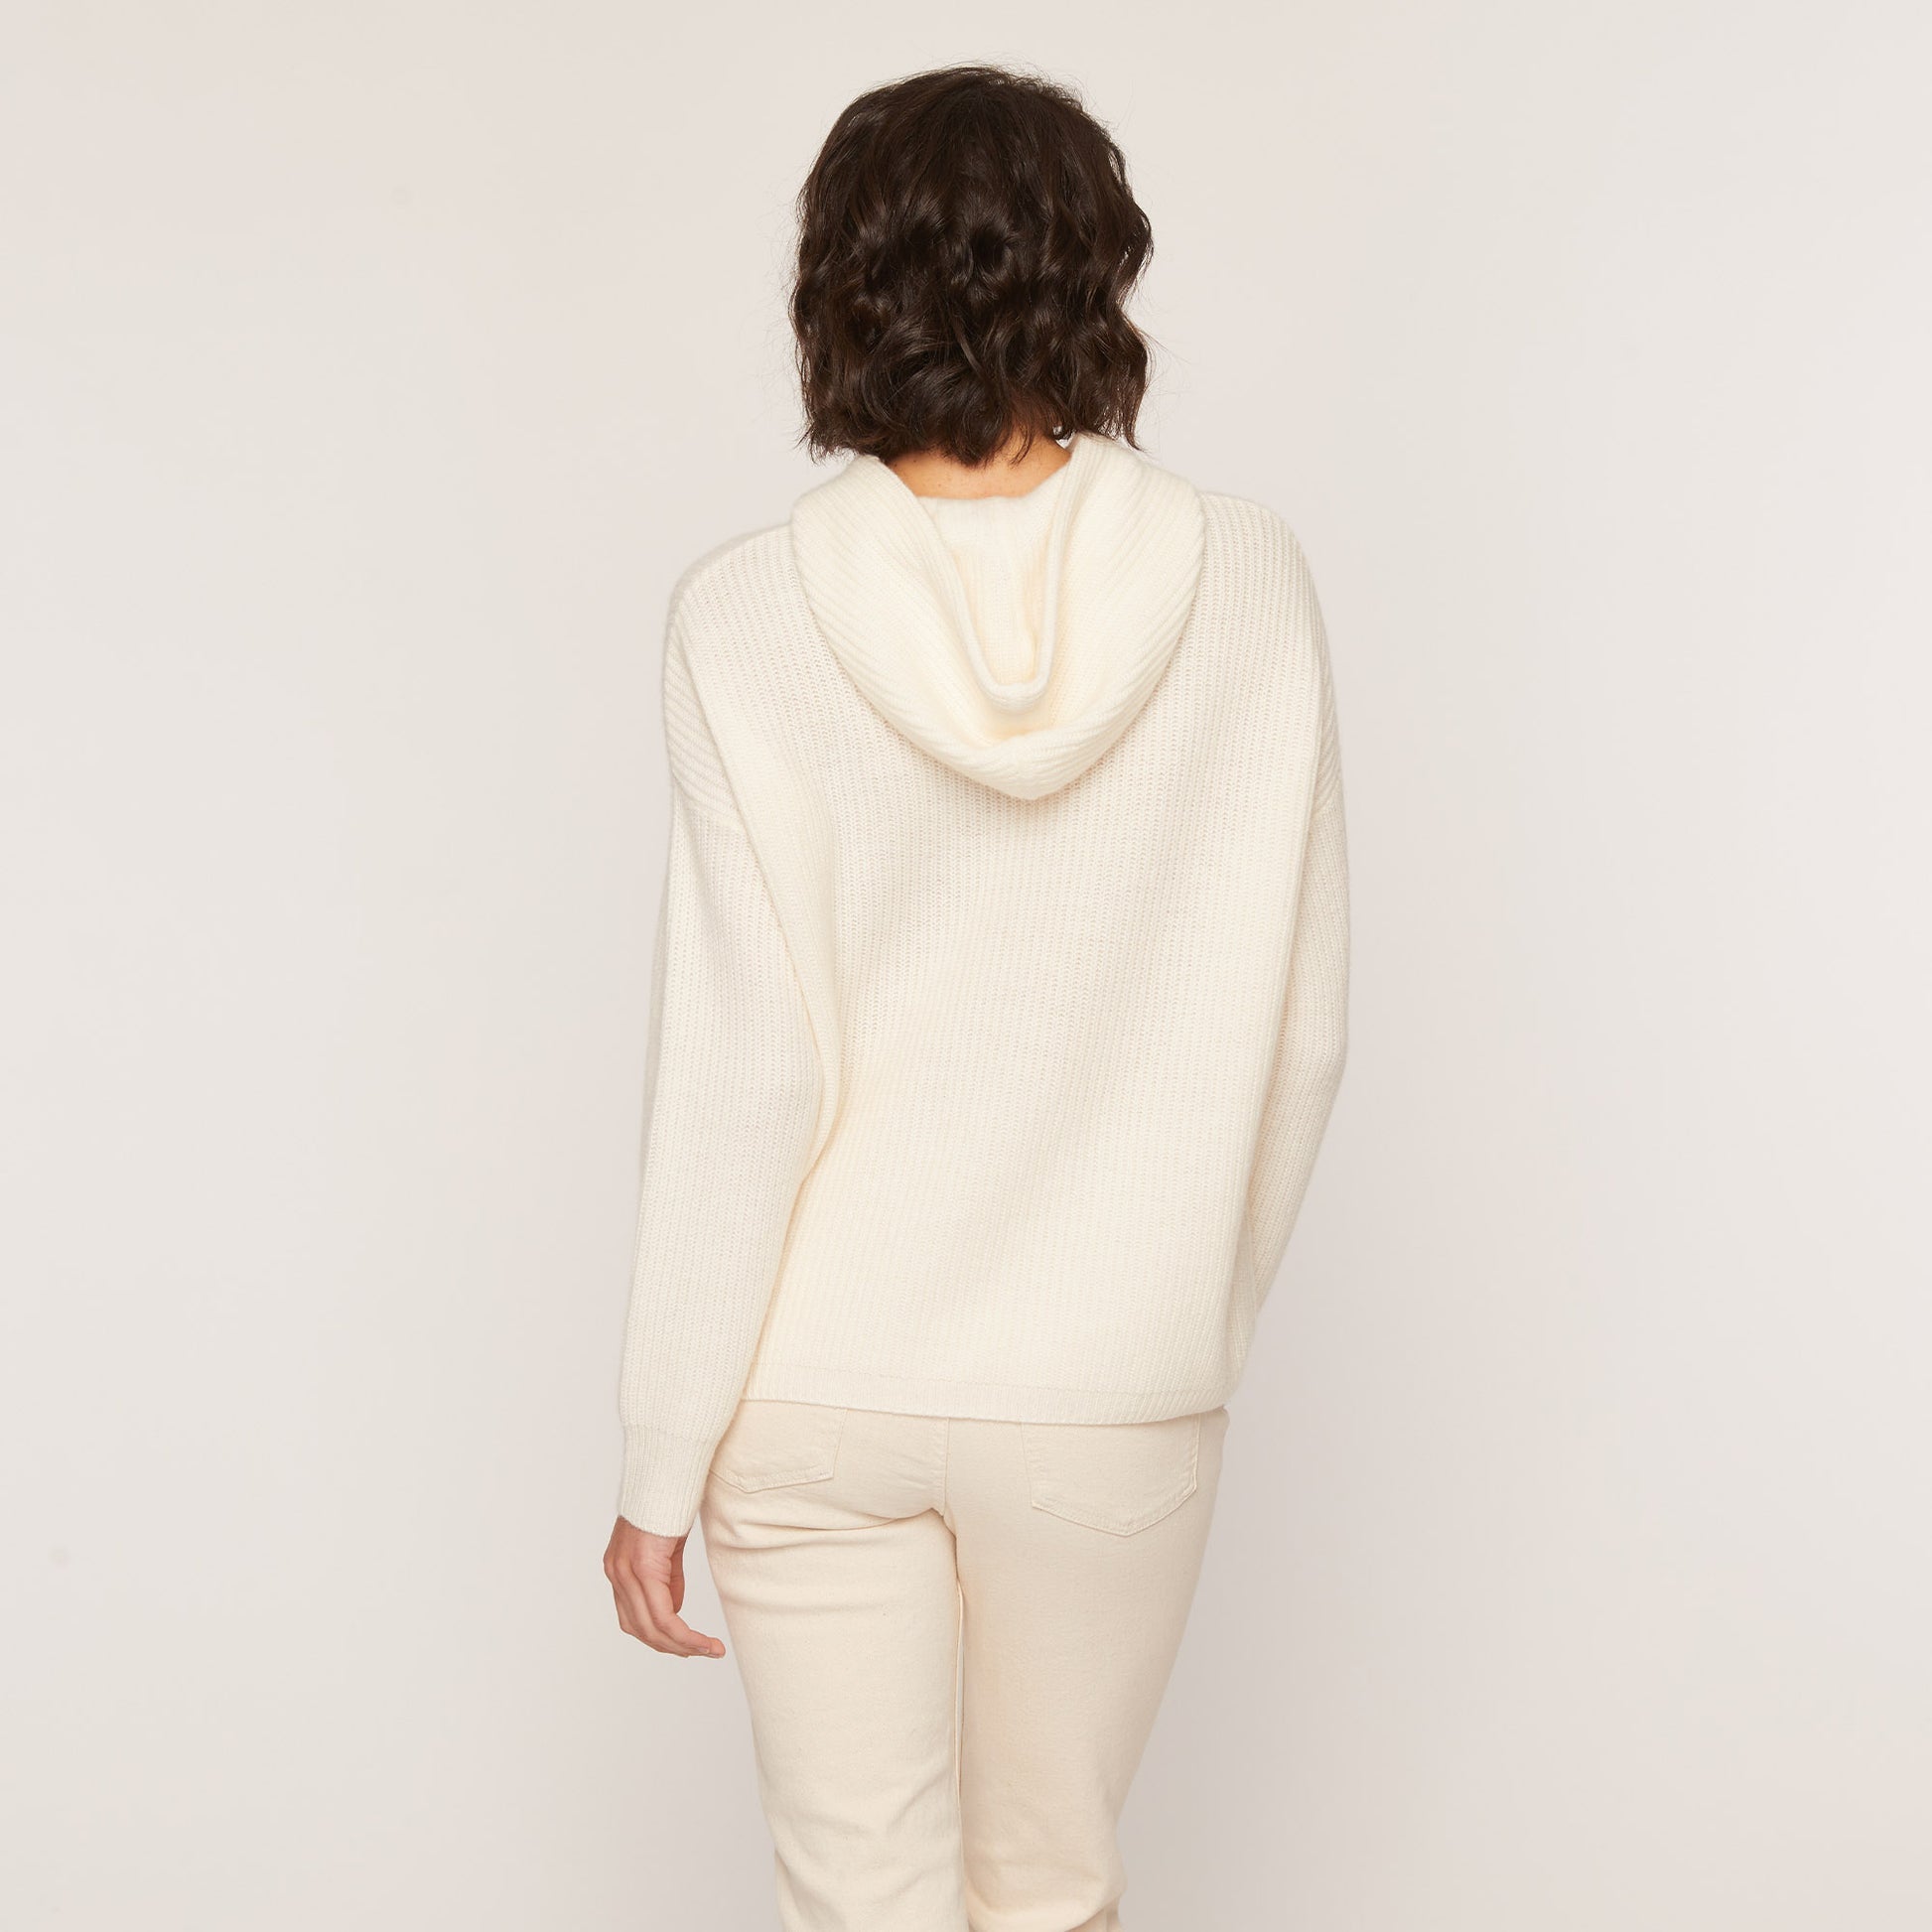 Cashmere Project Shaker Hoodie